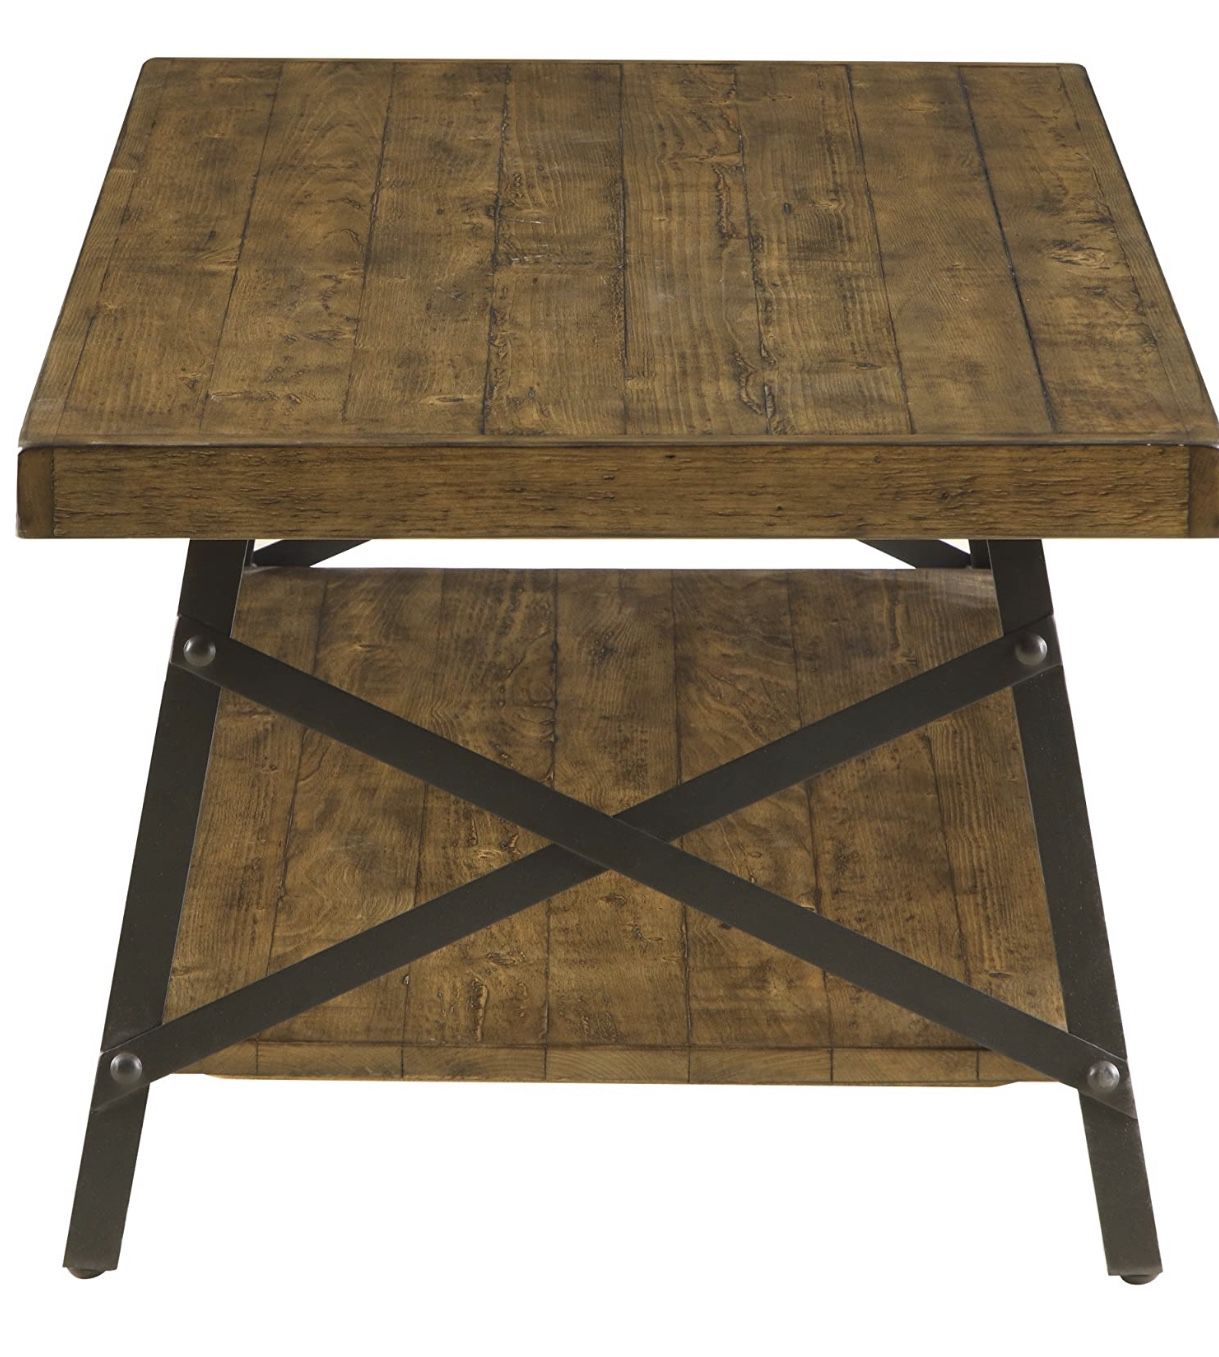 Home chandler Rustic industrial solid wood and steel coffee table with open shelf